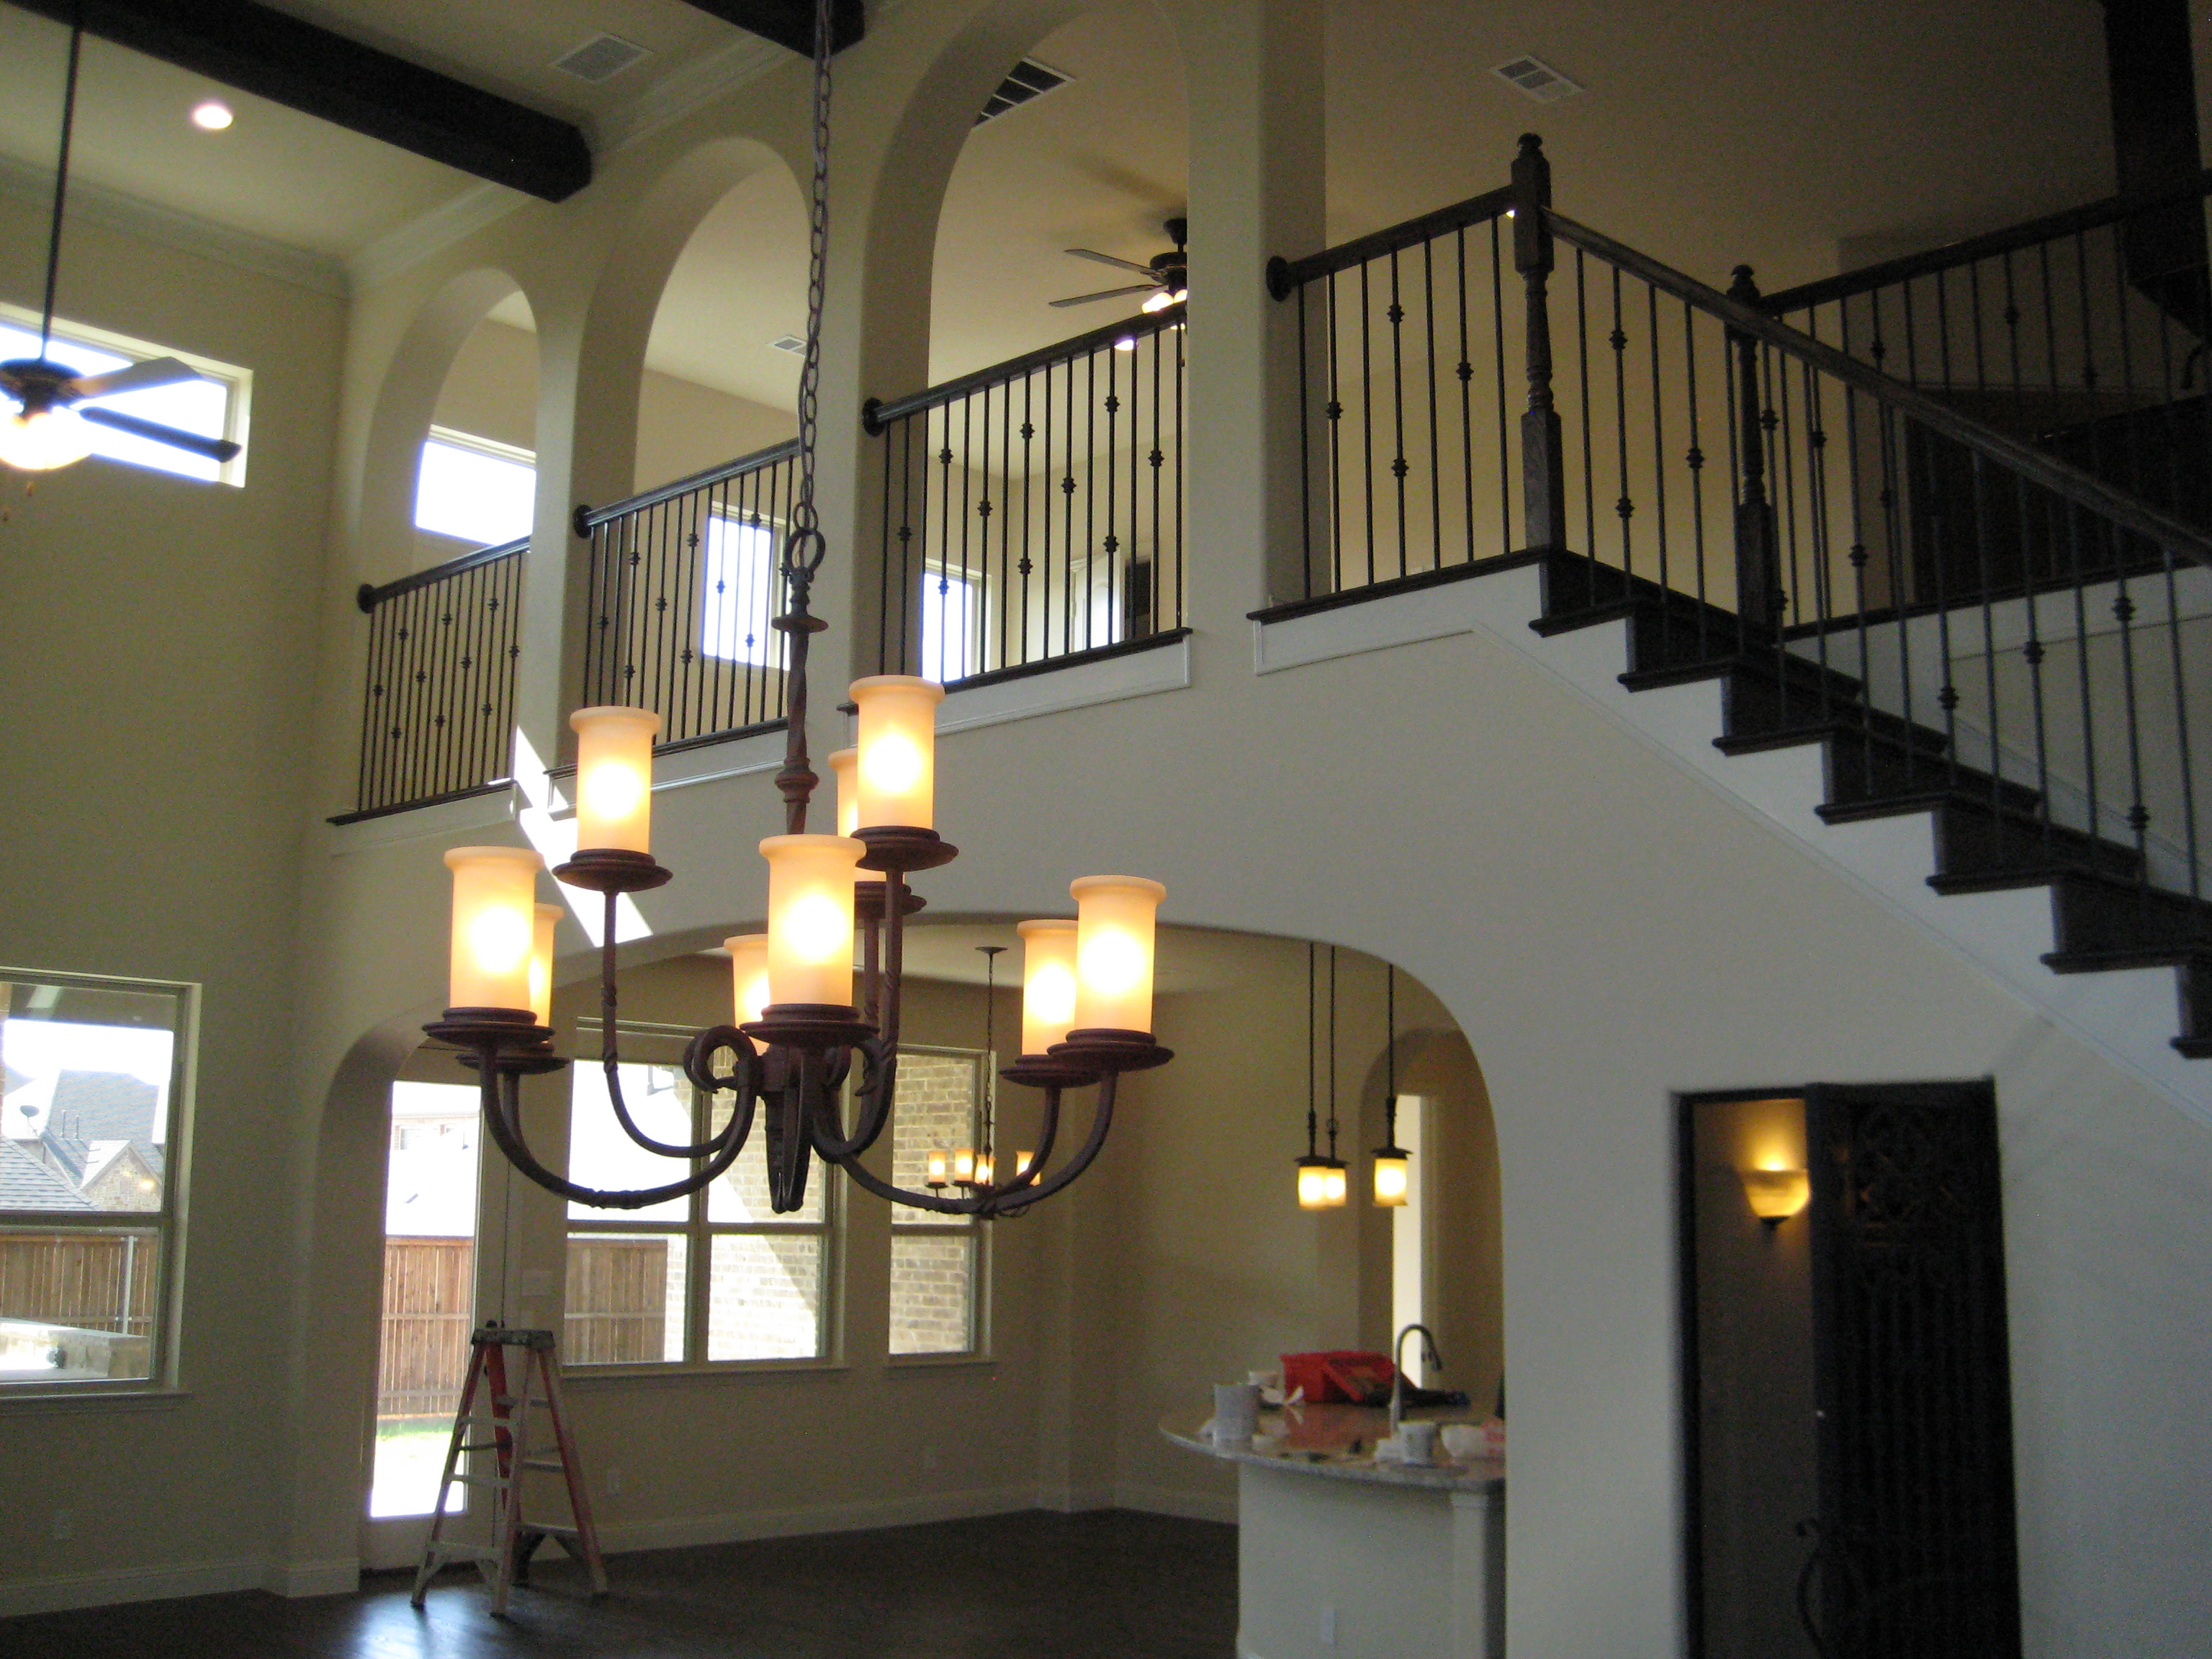 FAMILY ROOM, DINING ROOM AND HANDRAIL